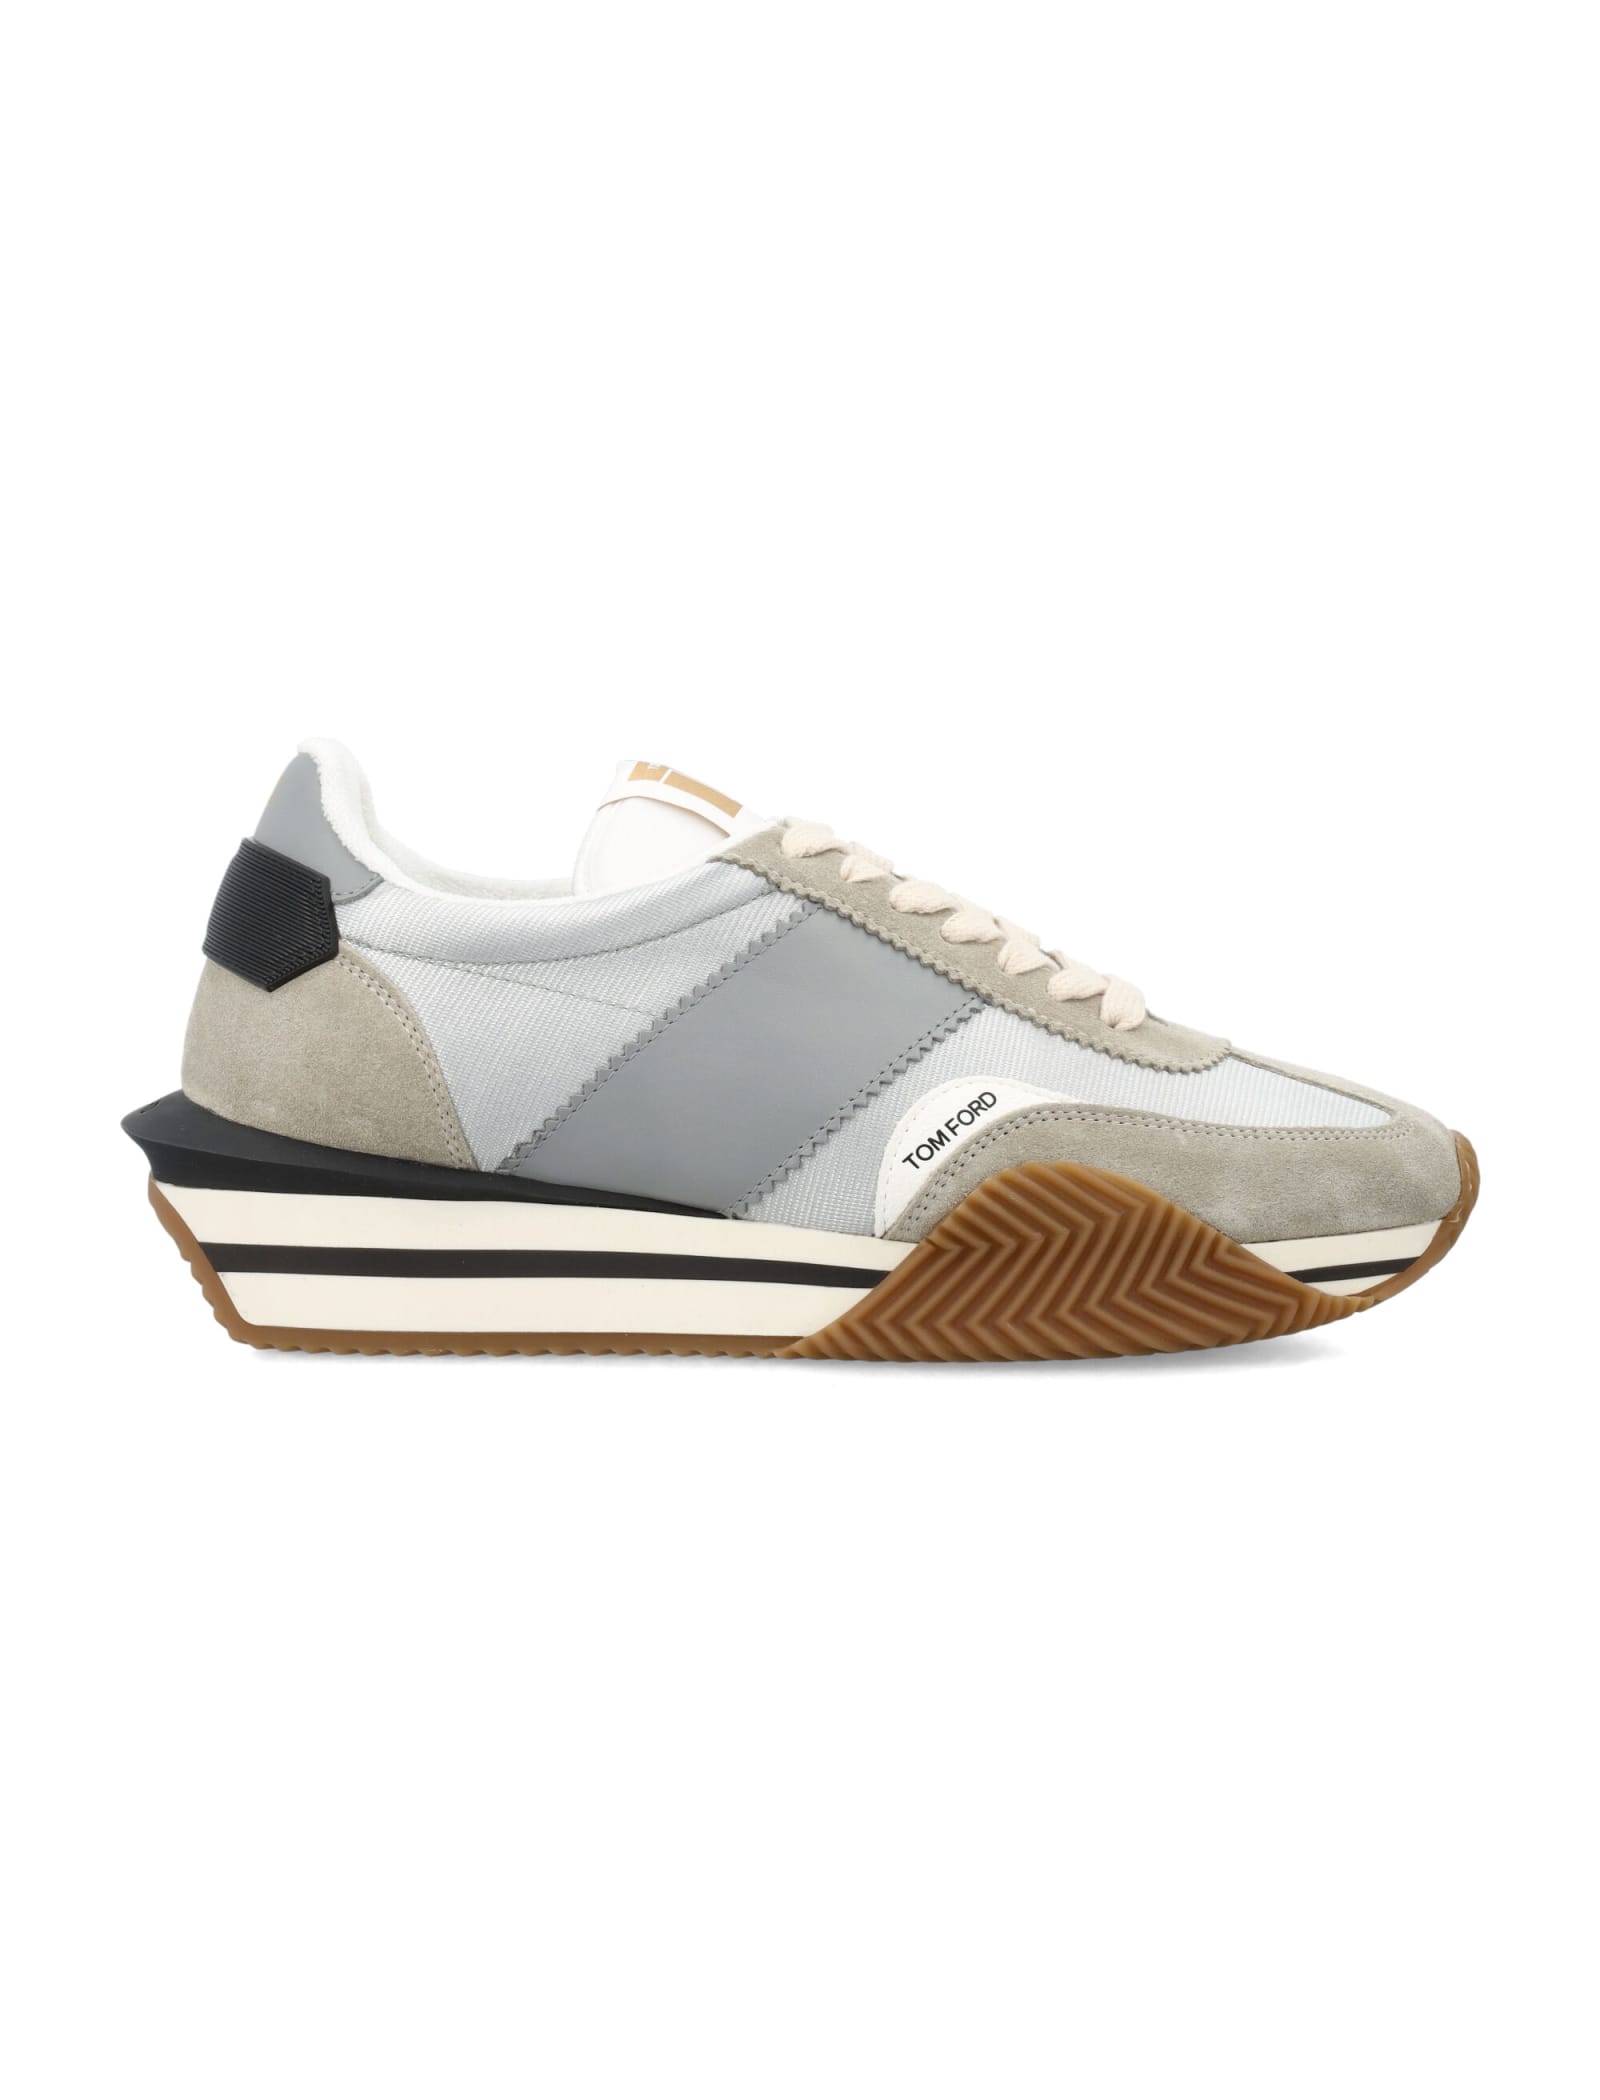 Shop Tom Ford James Sneakers In Silver+cream